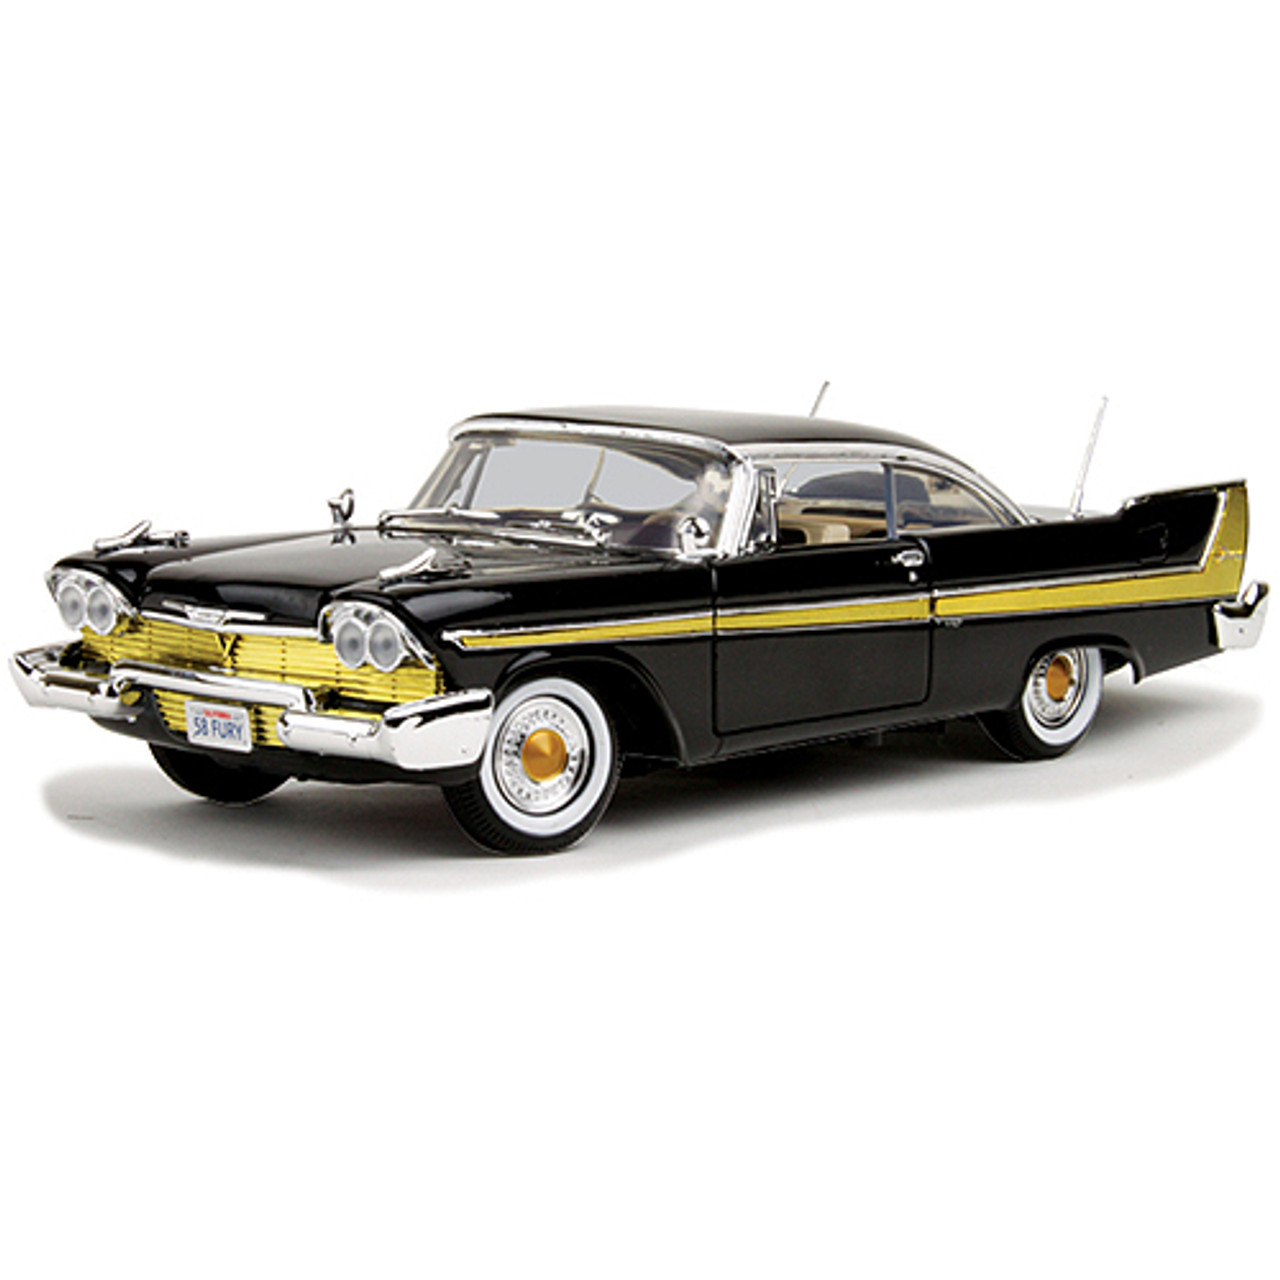 1958 Plymouth Fury - Black 1:18 Scale Diecast Model by Motormax